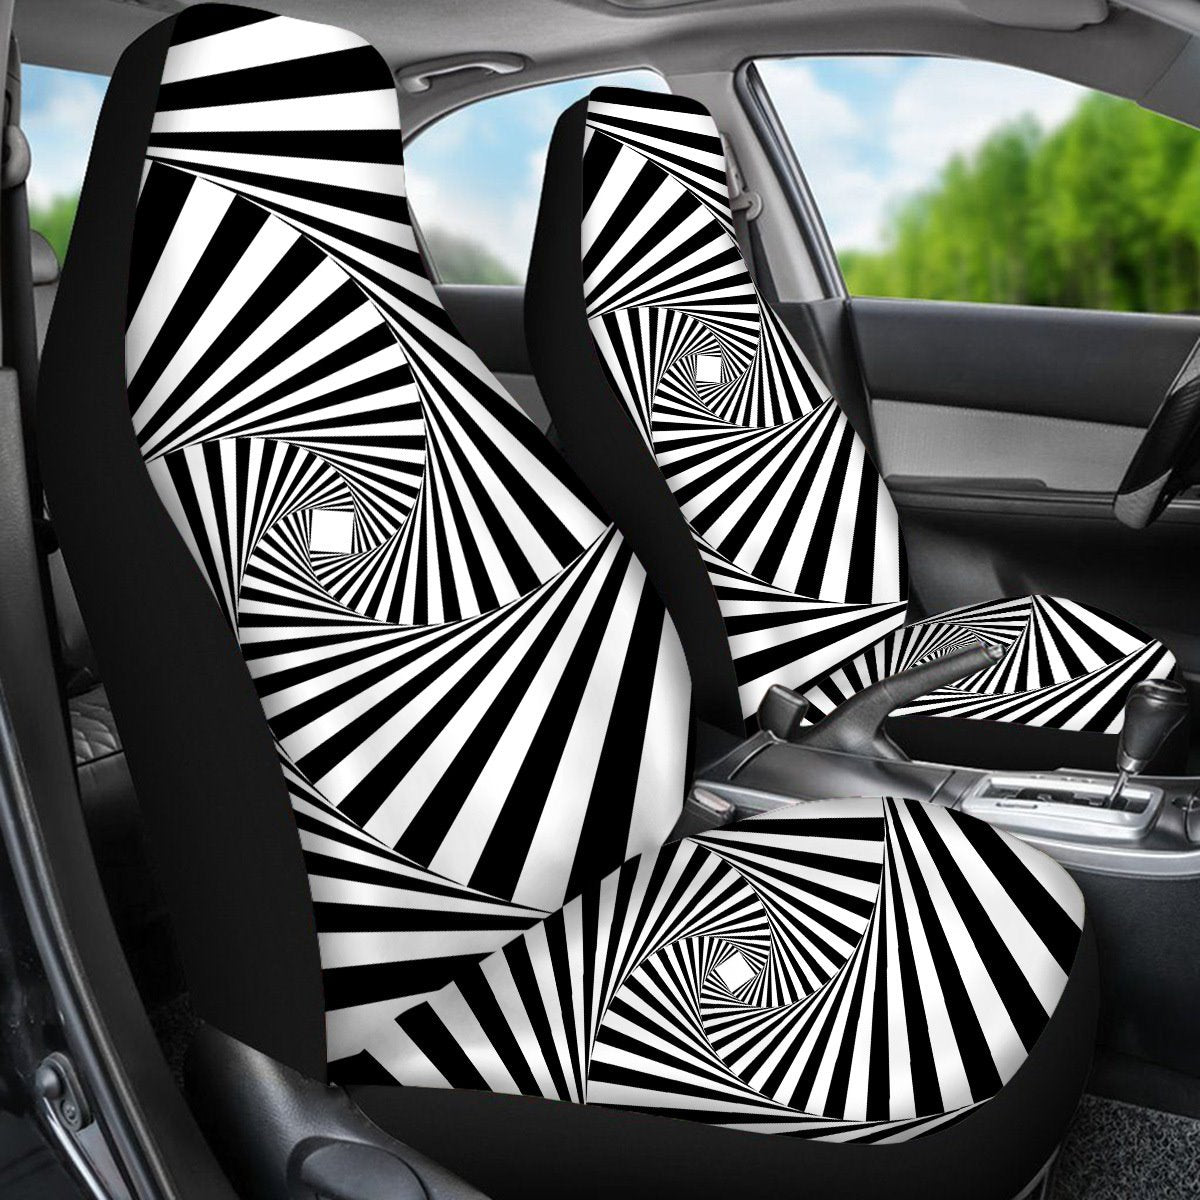 2PCS Front Seat Covers Zebra Pattern Universal Fit Seat Covers Will Stretch to Fit Most Car and SUV Bucket Style Seats